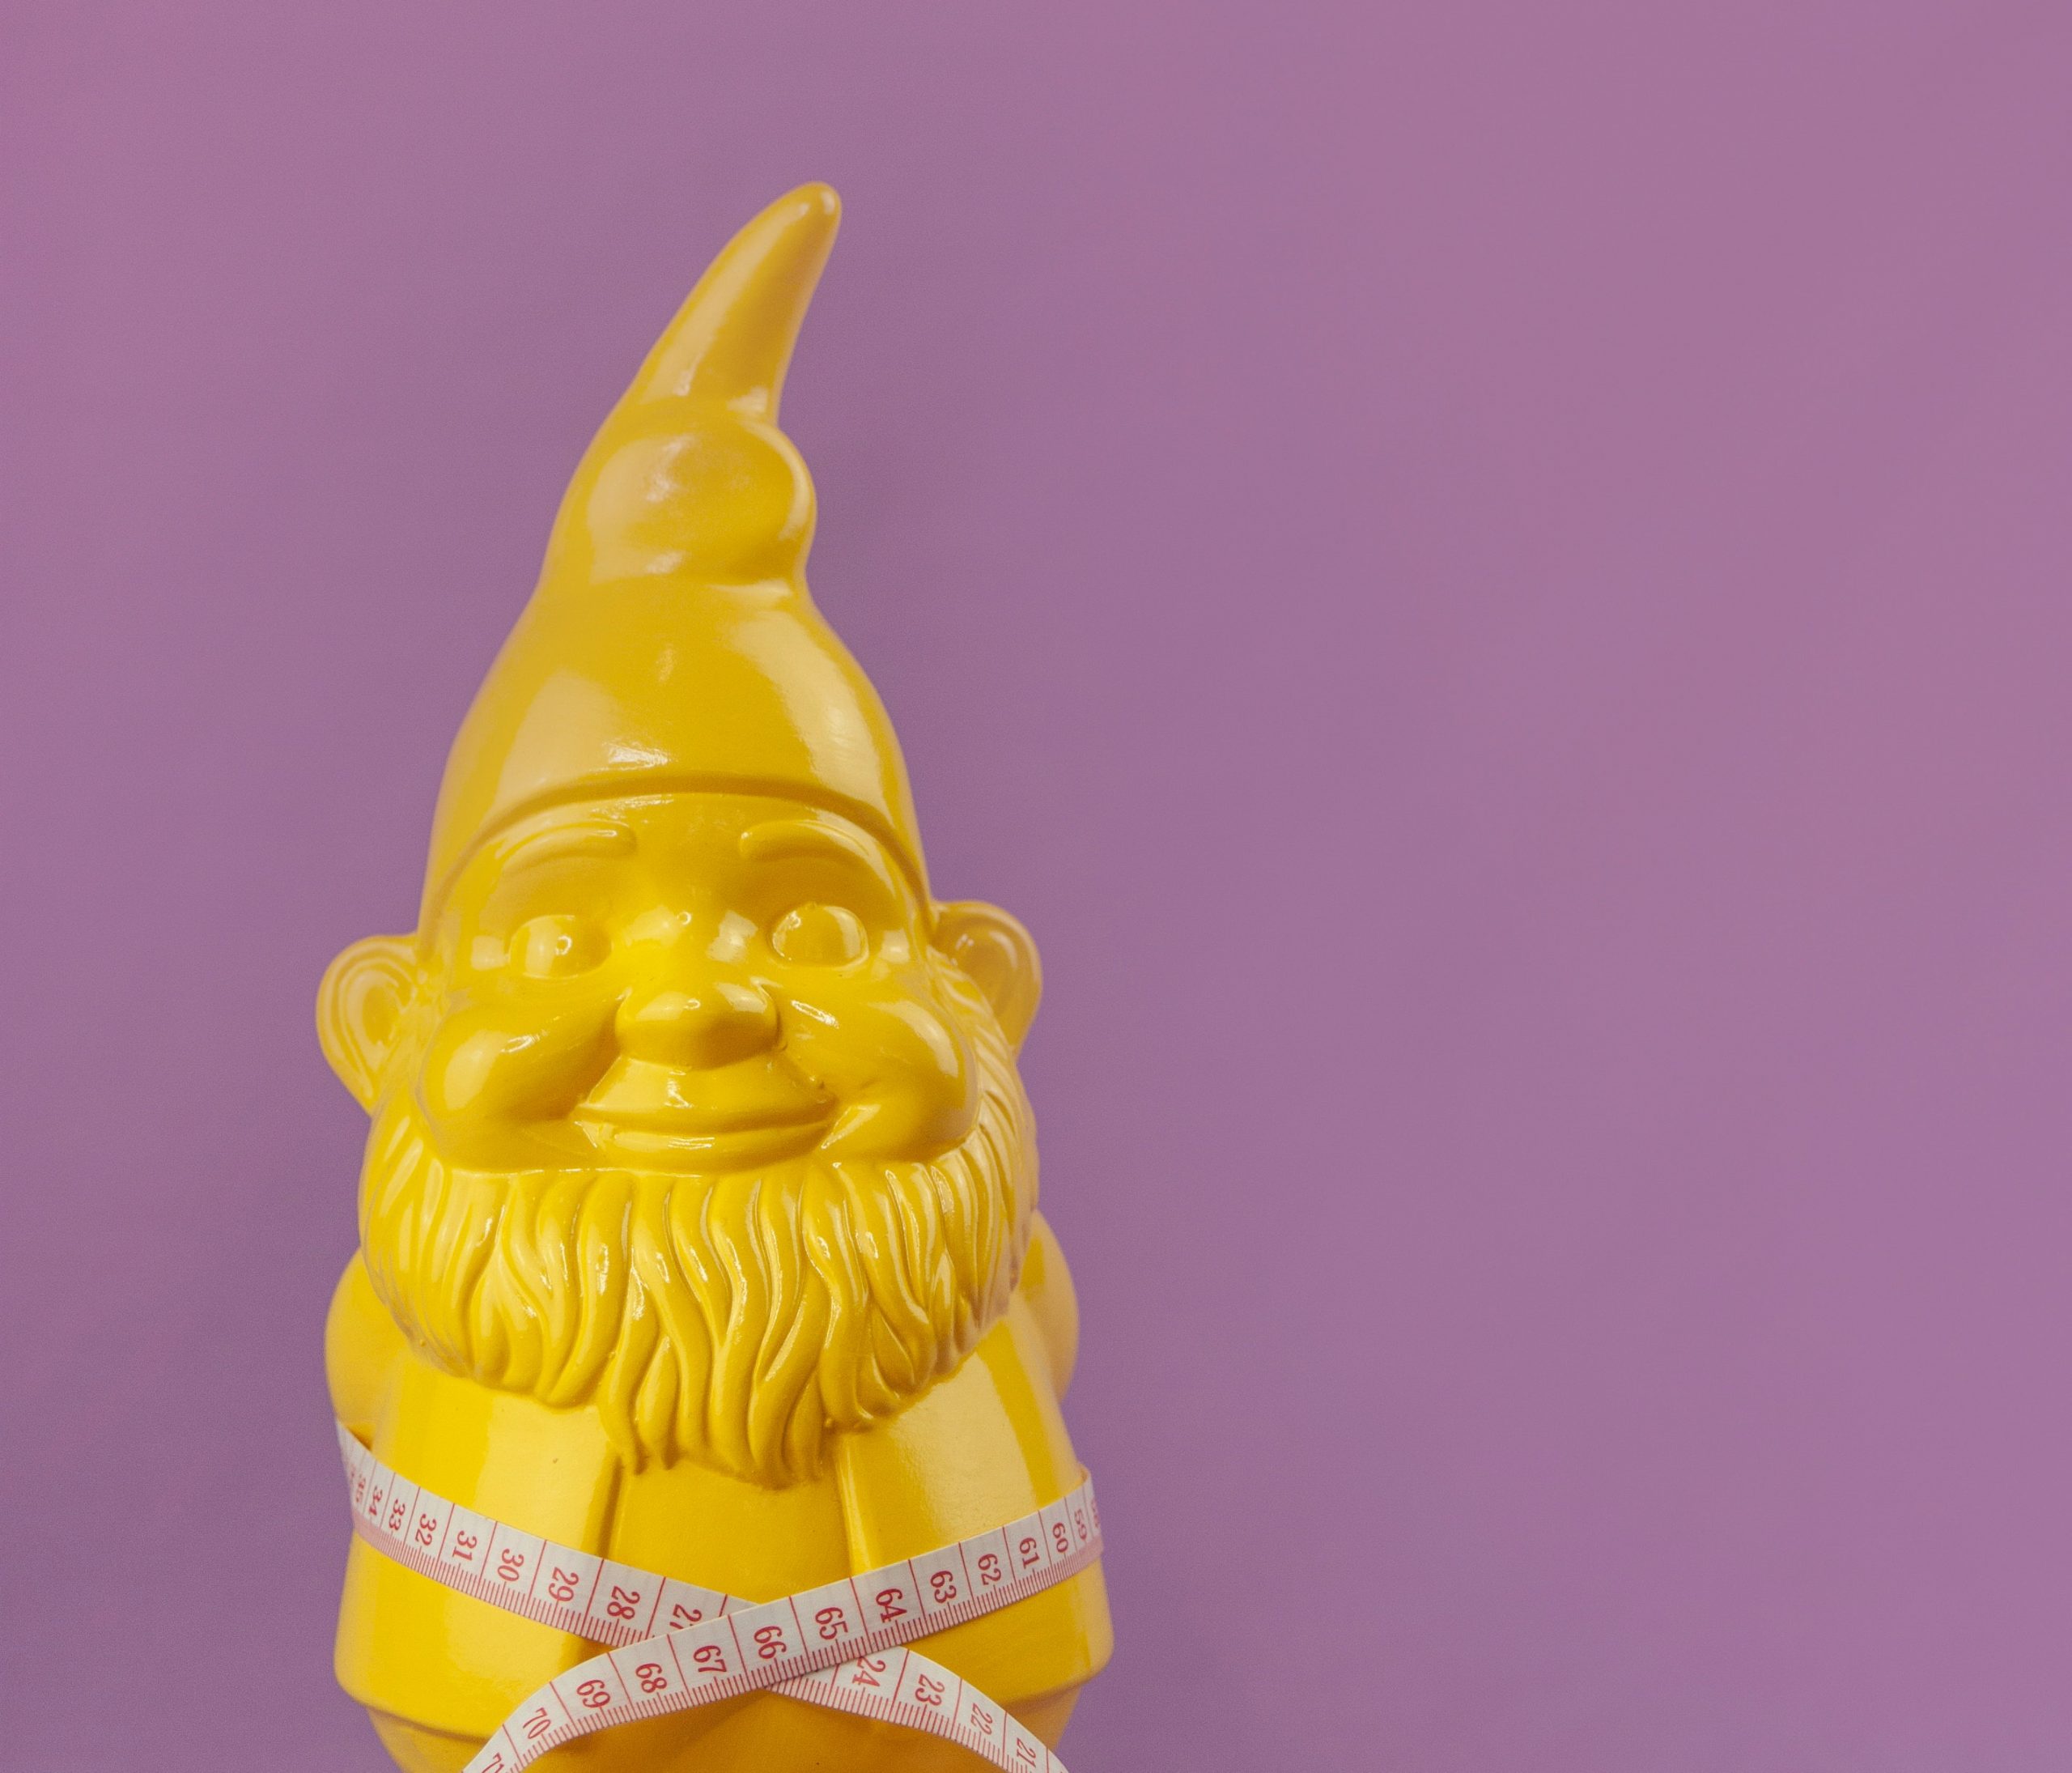 A yellow garden gnome on a pink background